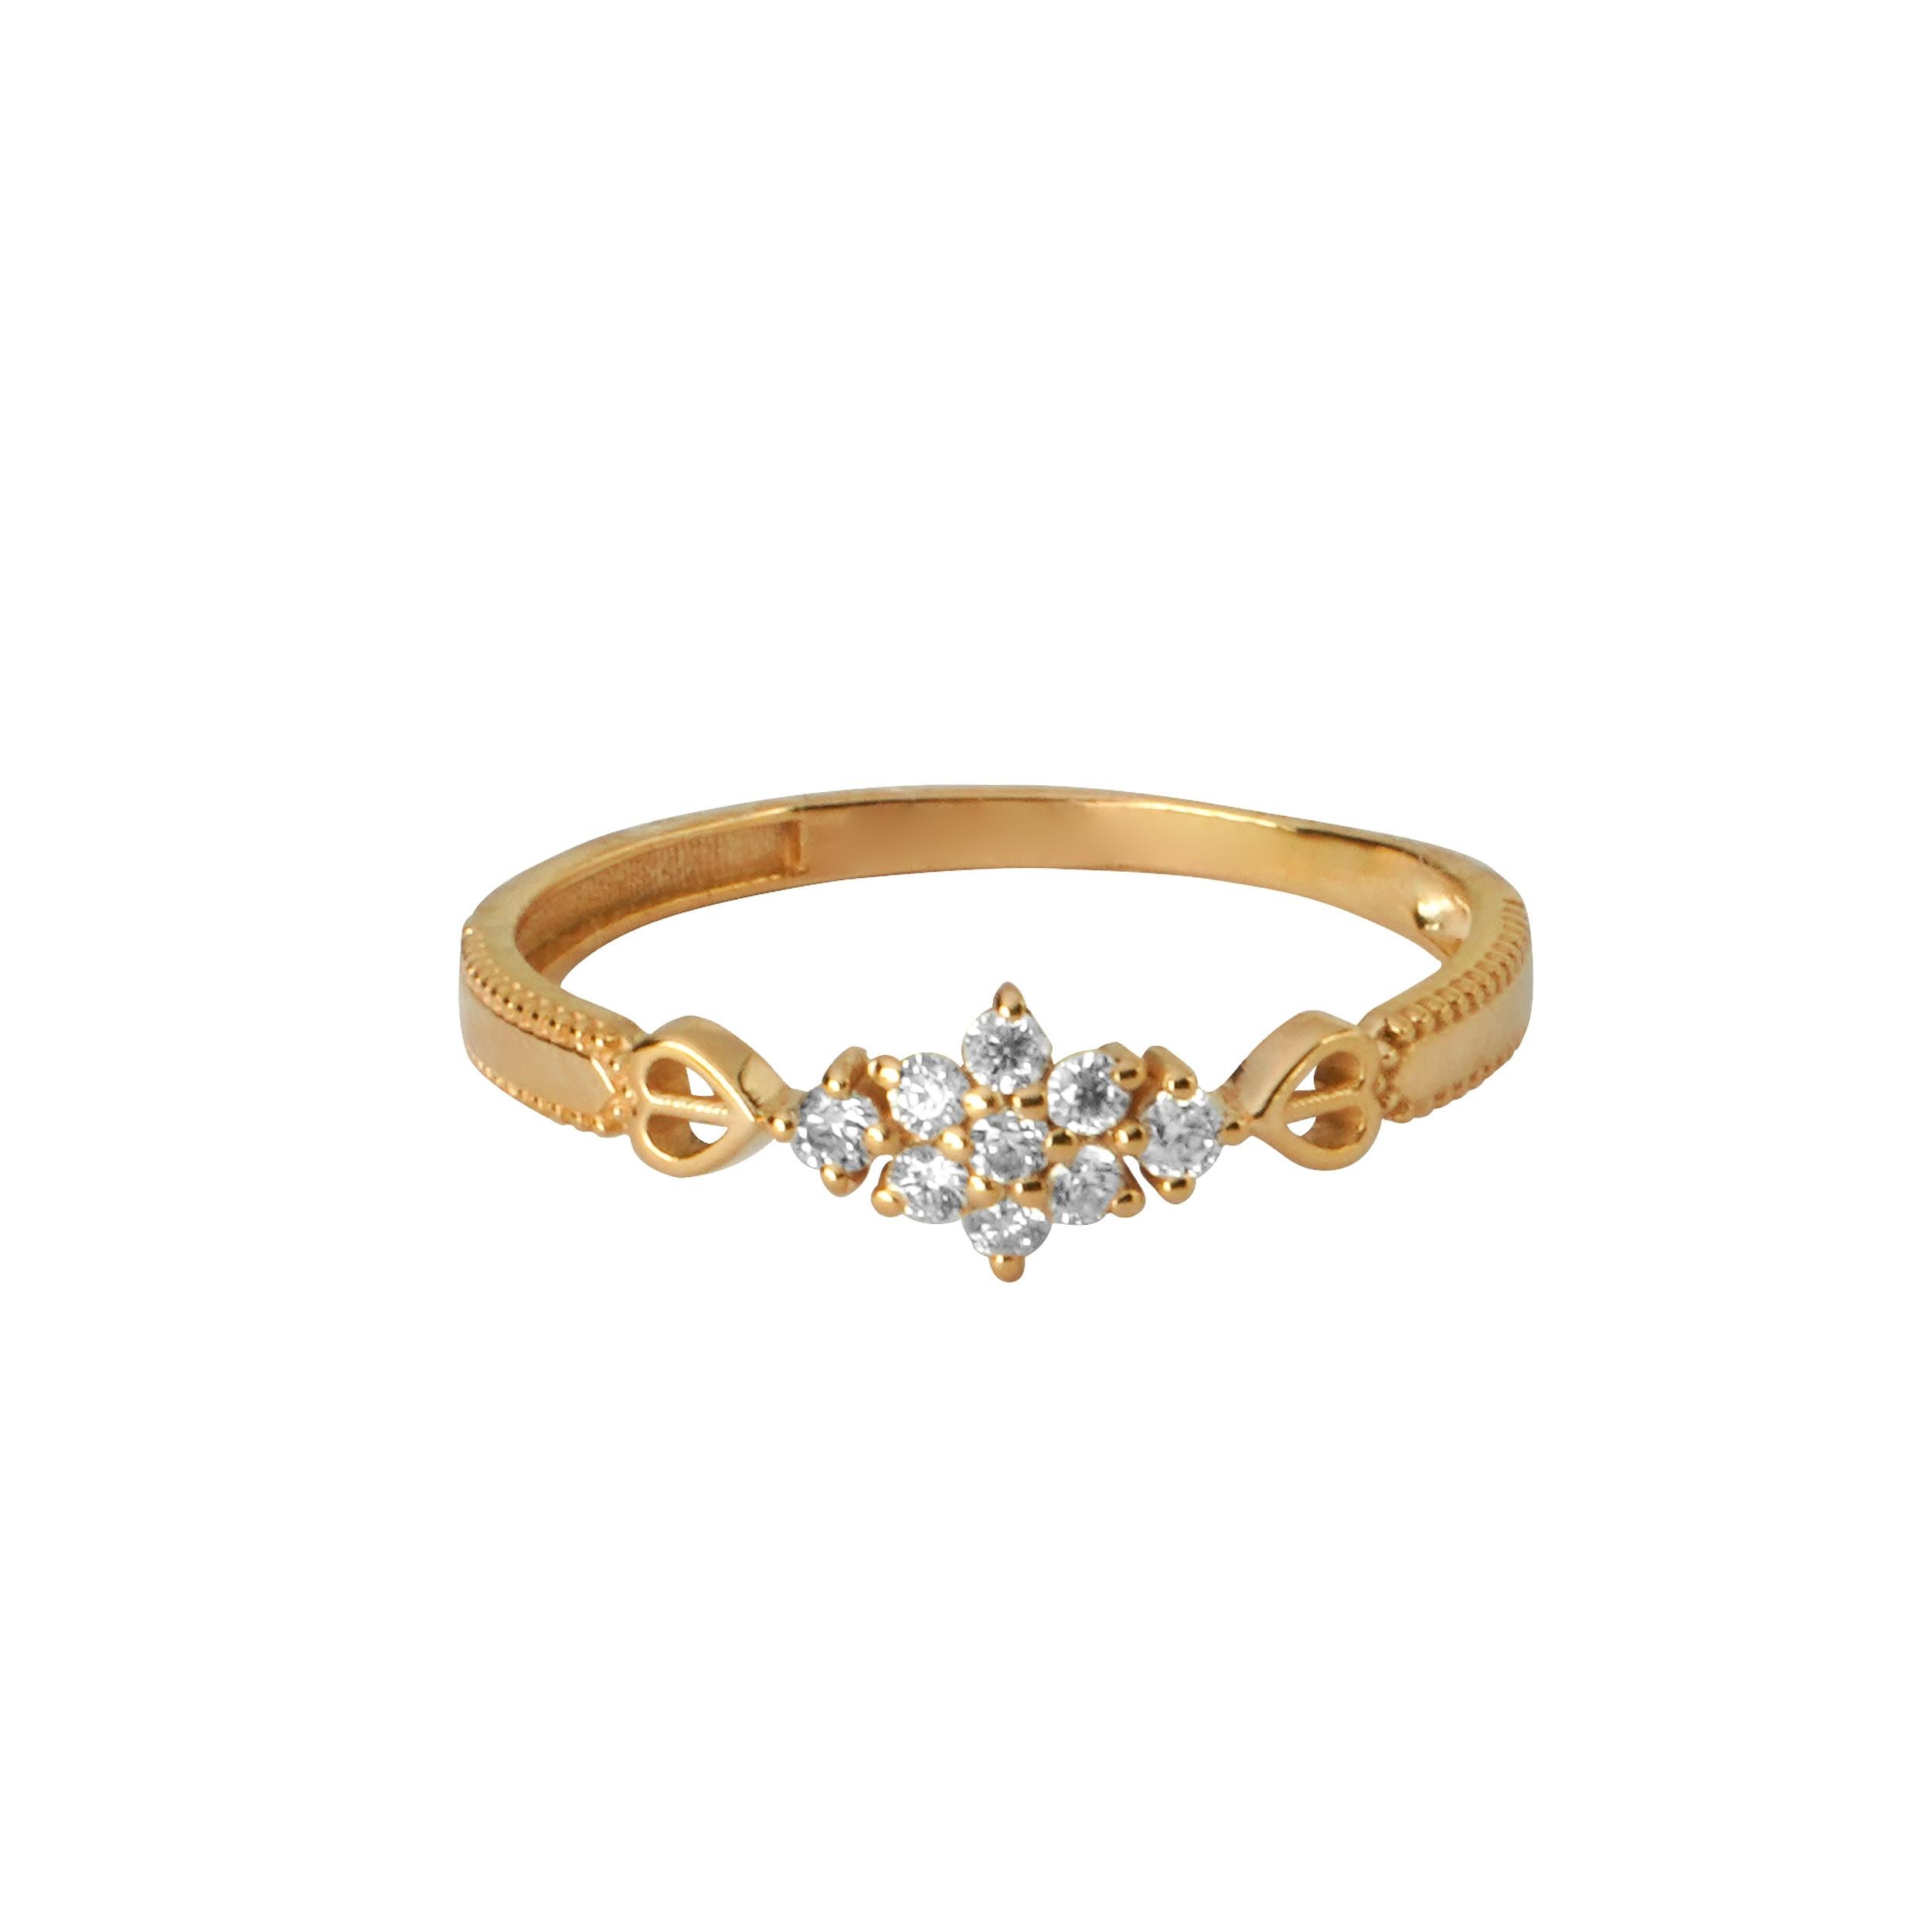 Are you ready to bask in the celestial glow? Our 18K Solid Gold Sunbeam Ring is a masterpiece that captures the essence of the sun’s warmth and radiance. Whether you’re celebrating a special moment or simply treating yourself, this ring is the